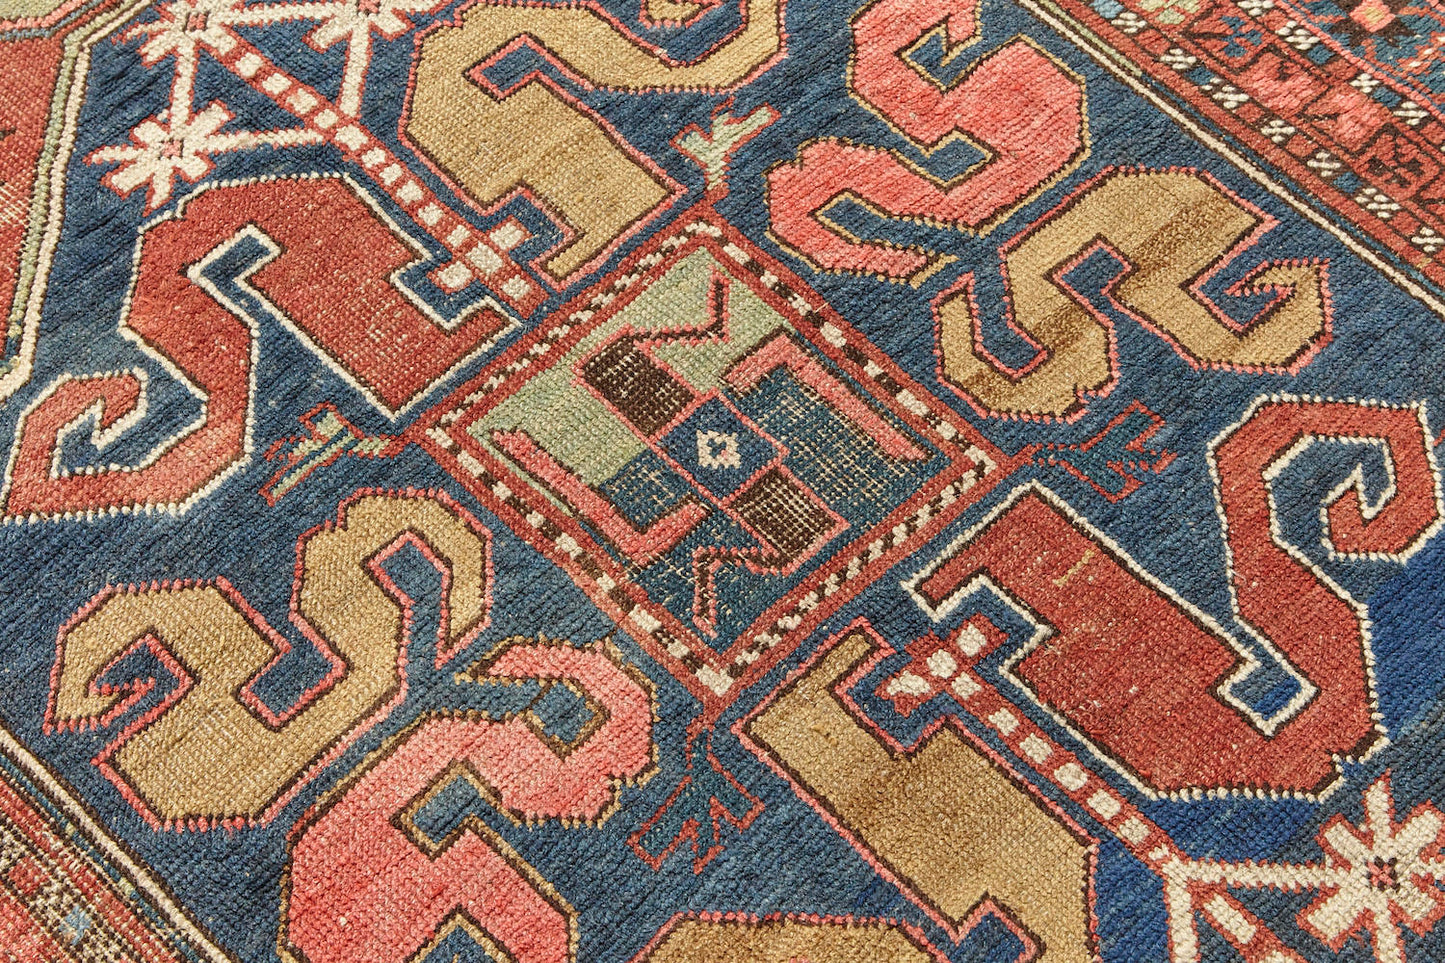 Detail of Kazak Cloudband antique Persian rug with rich pink base and two large medallion designs in the center, one pale green, one blue with pink, red, gold, cream and blue designs intricately hand woven throughout. A beautiful piece for a bedroom, hallway, dining room or study - Available from King Kennedy Rugs Los Angeles